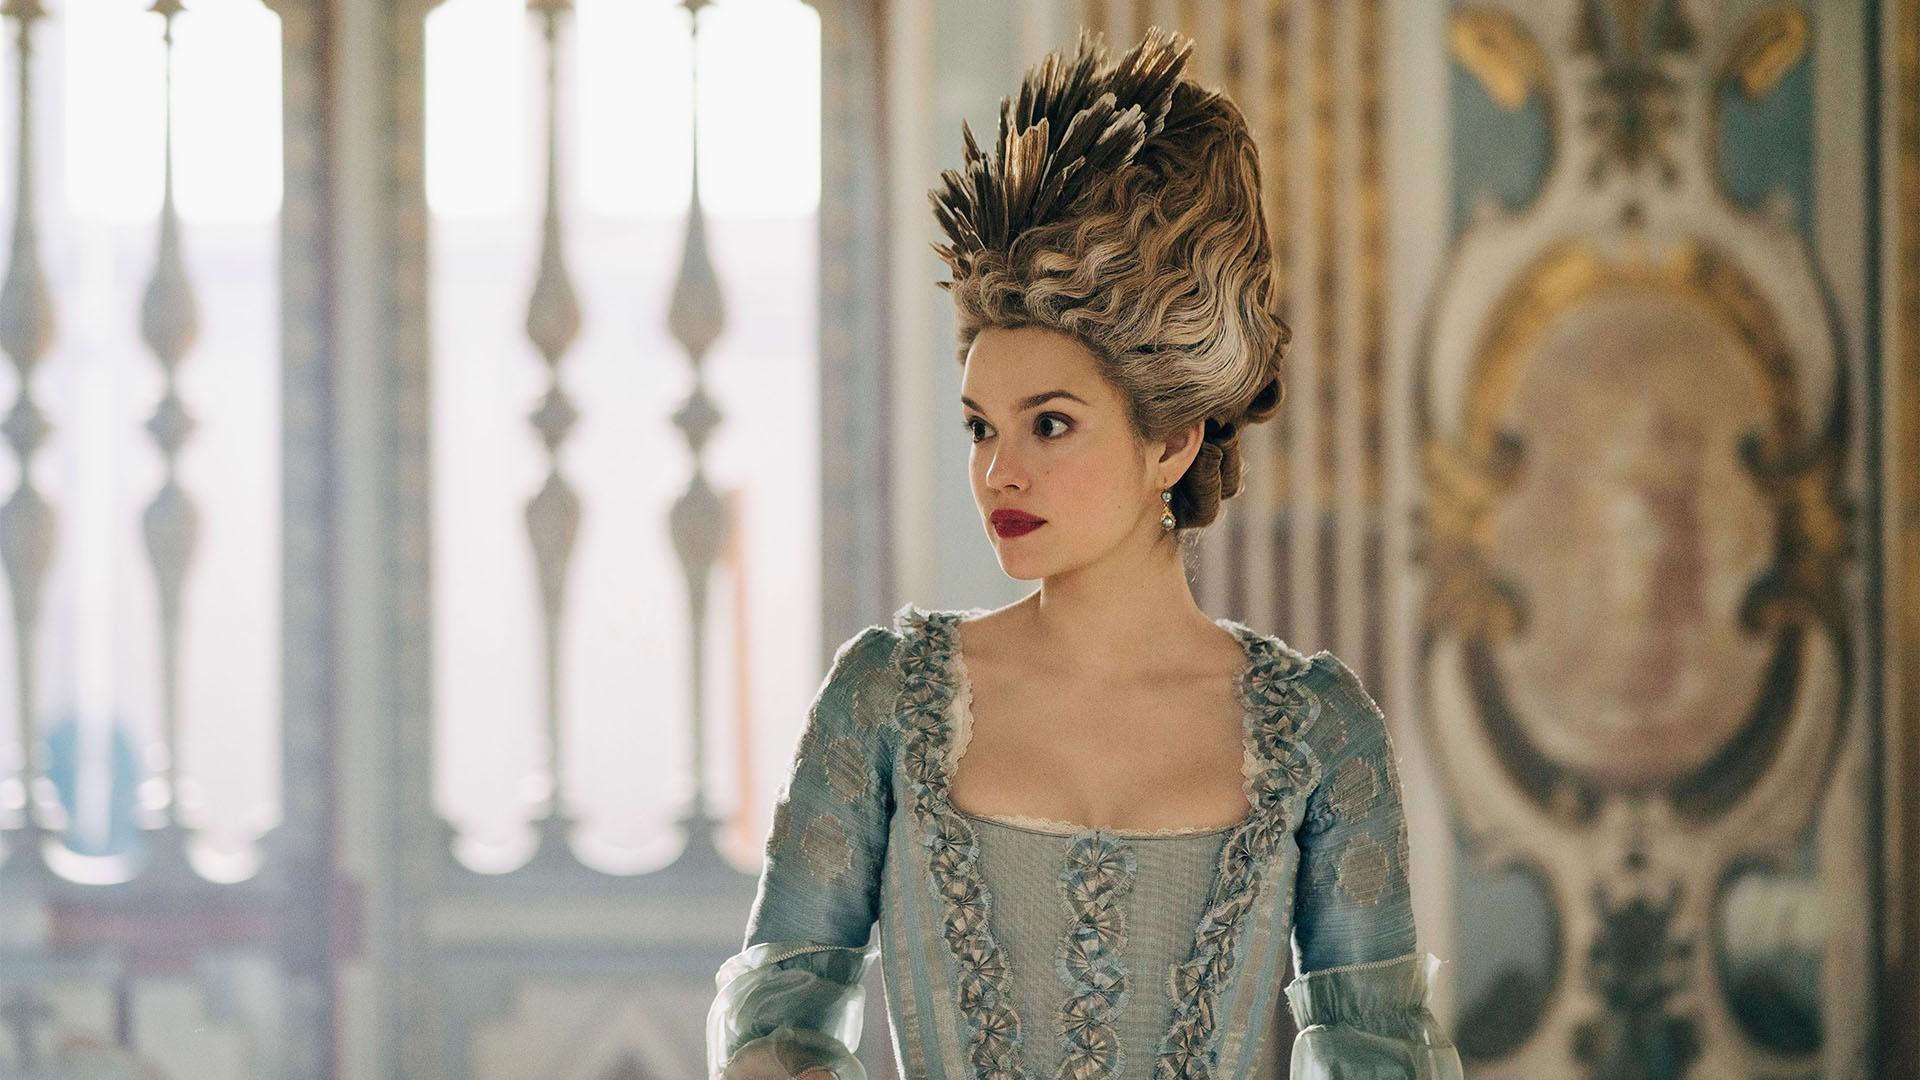 Marie Antoinette, played by actress Emilia Schüle